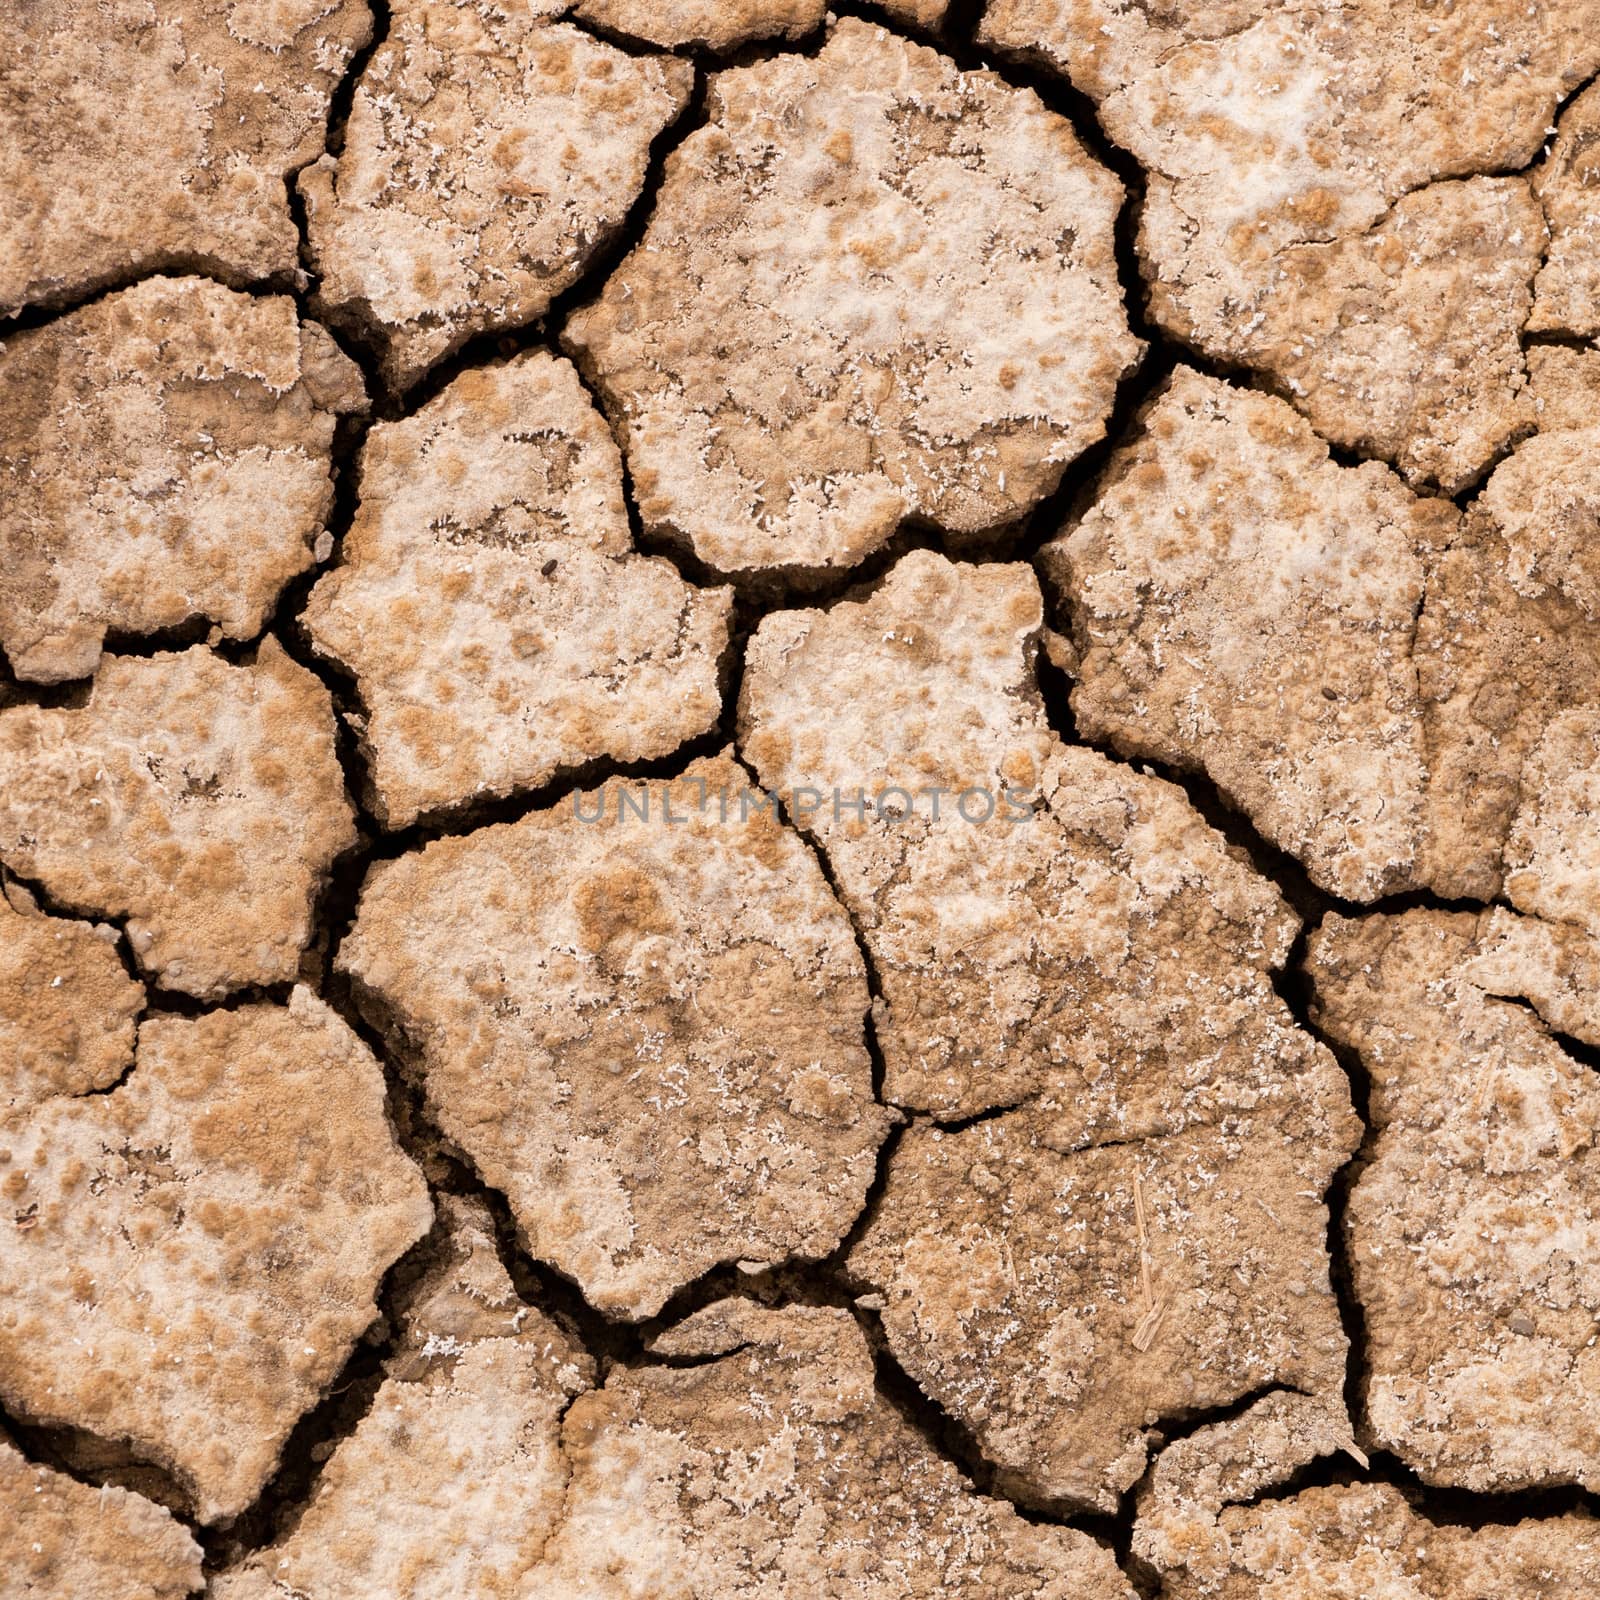 Cracked dry mud drought concept nature background by PiLens